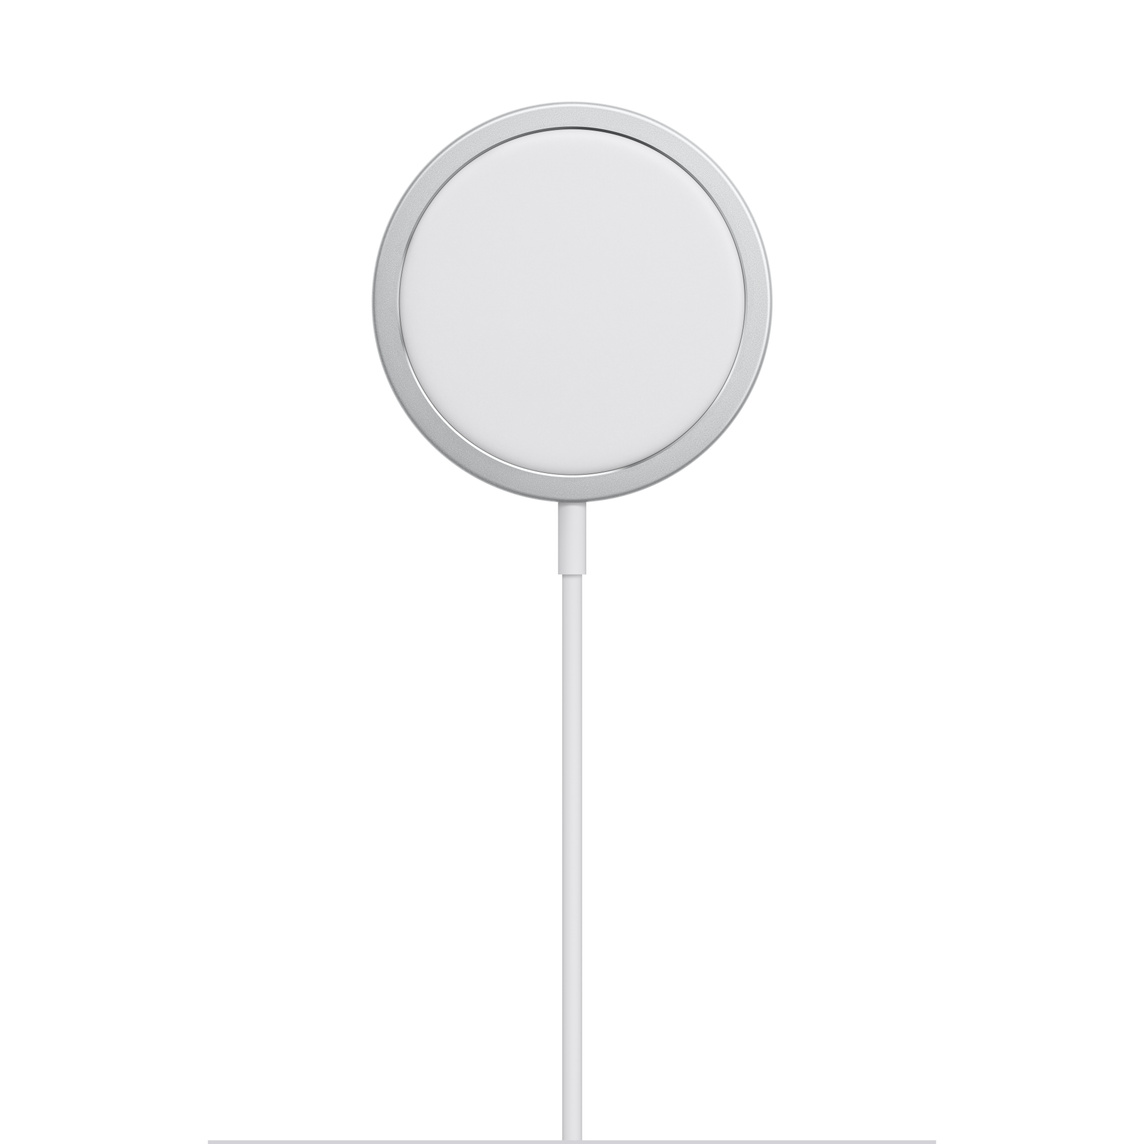 The MagSafe Charger features perfectly aligned magnets to provide faster wireless charging, up to 15 watts.